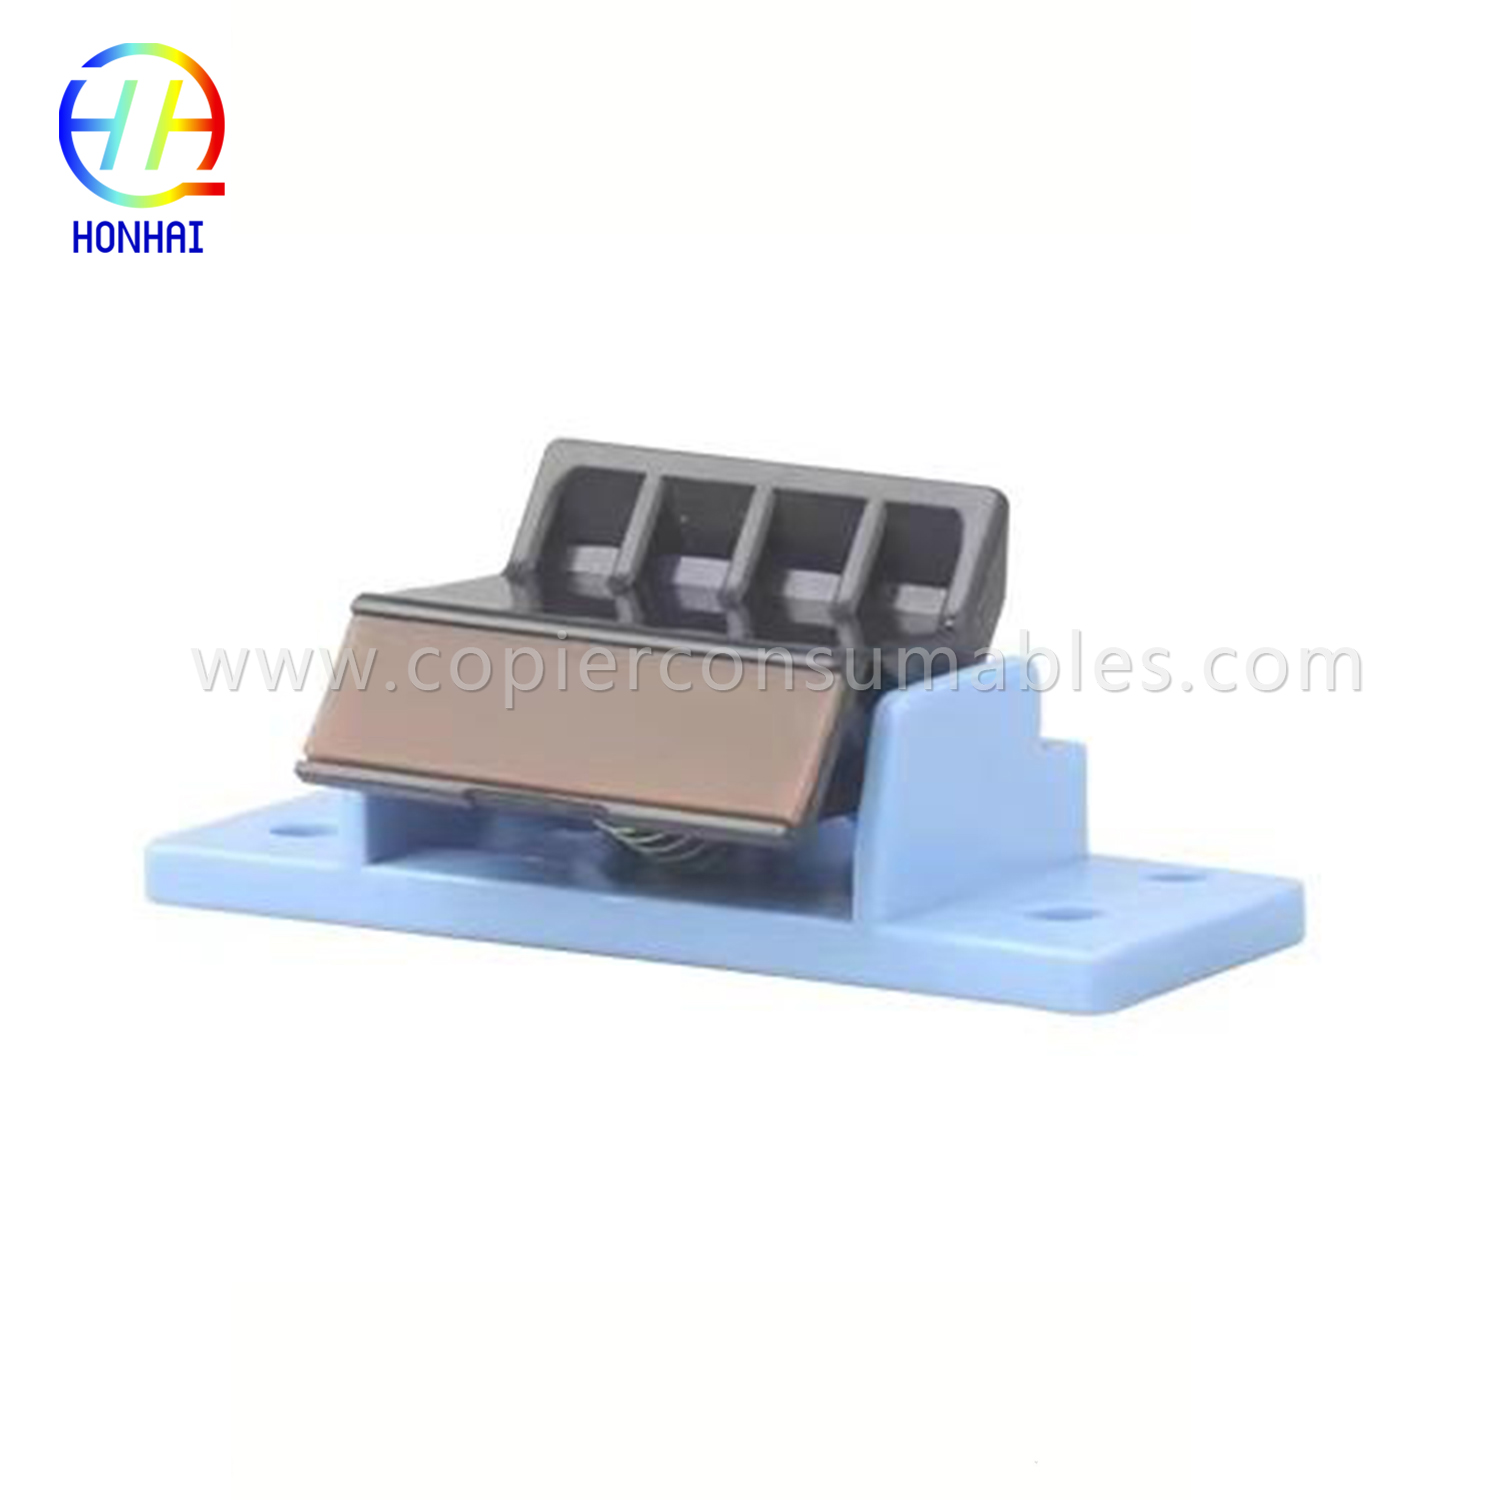 Separation Pad for HP Laserjet 1010 1012 1015 1018 1020 3015 3020 3030 3030xi M1005mfp (RM1-0648-000)